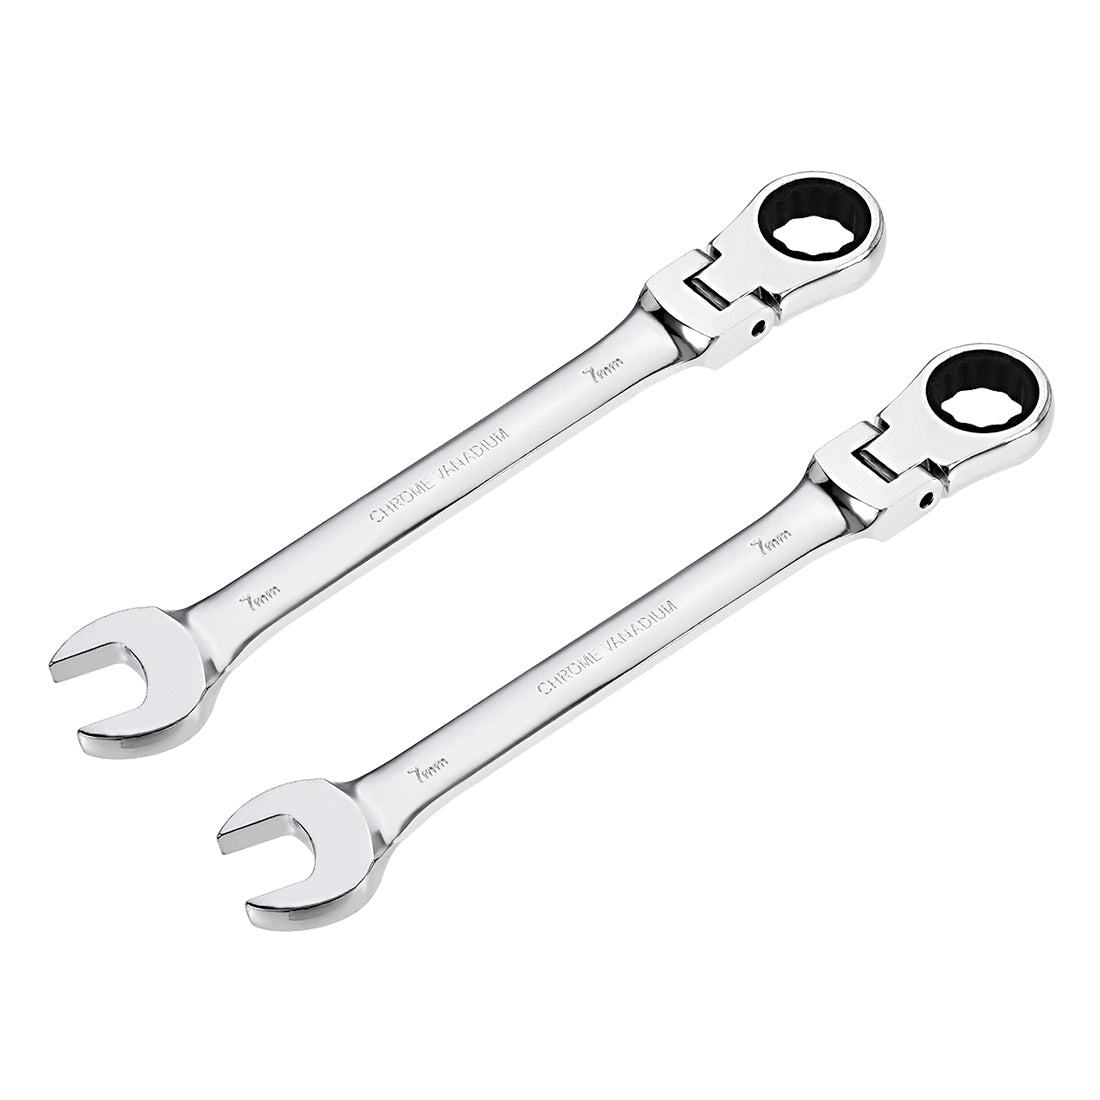 uxcell Uxcell Flex-Head Ratcheting Combination Wrench Metric 72 Teeth 12 Point Ratchet Box Ended Spanner Tool, Cr-V